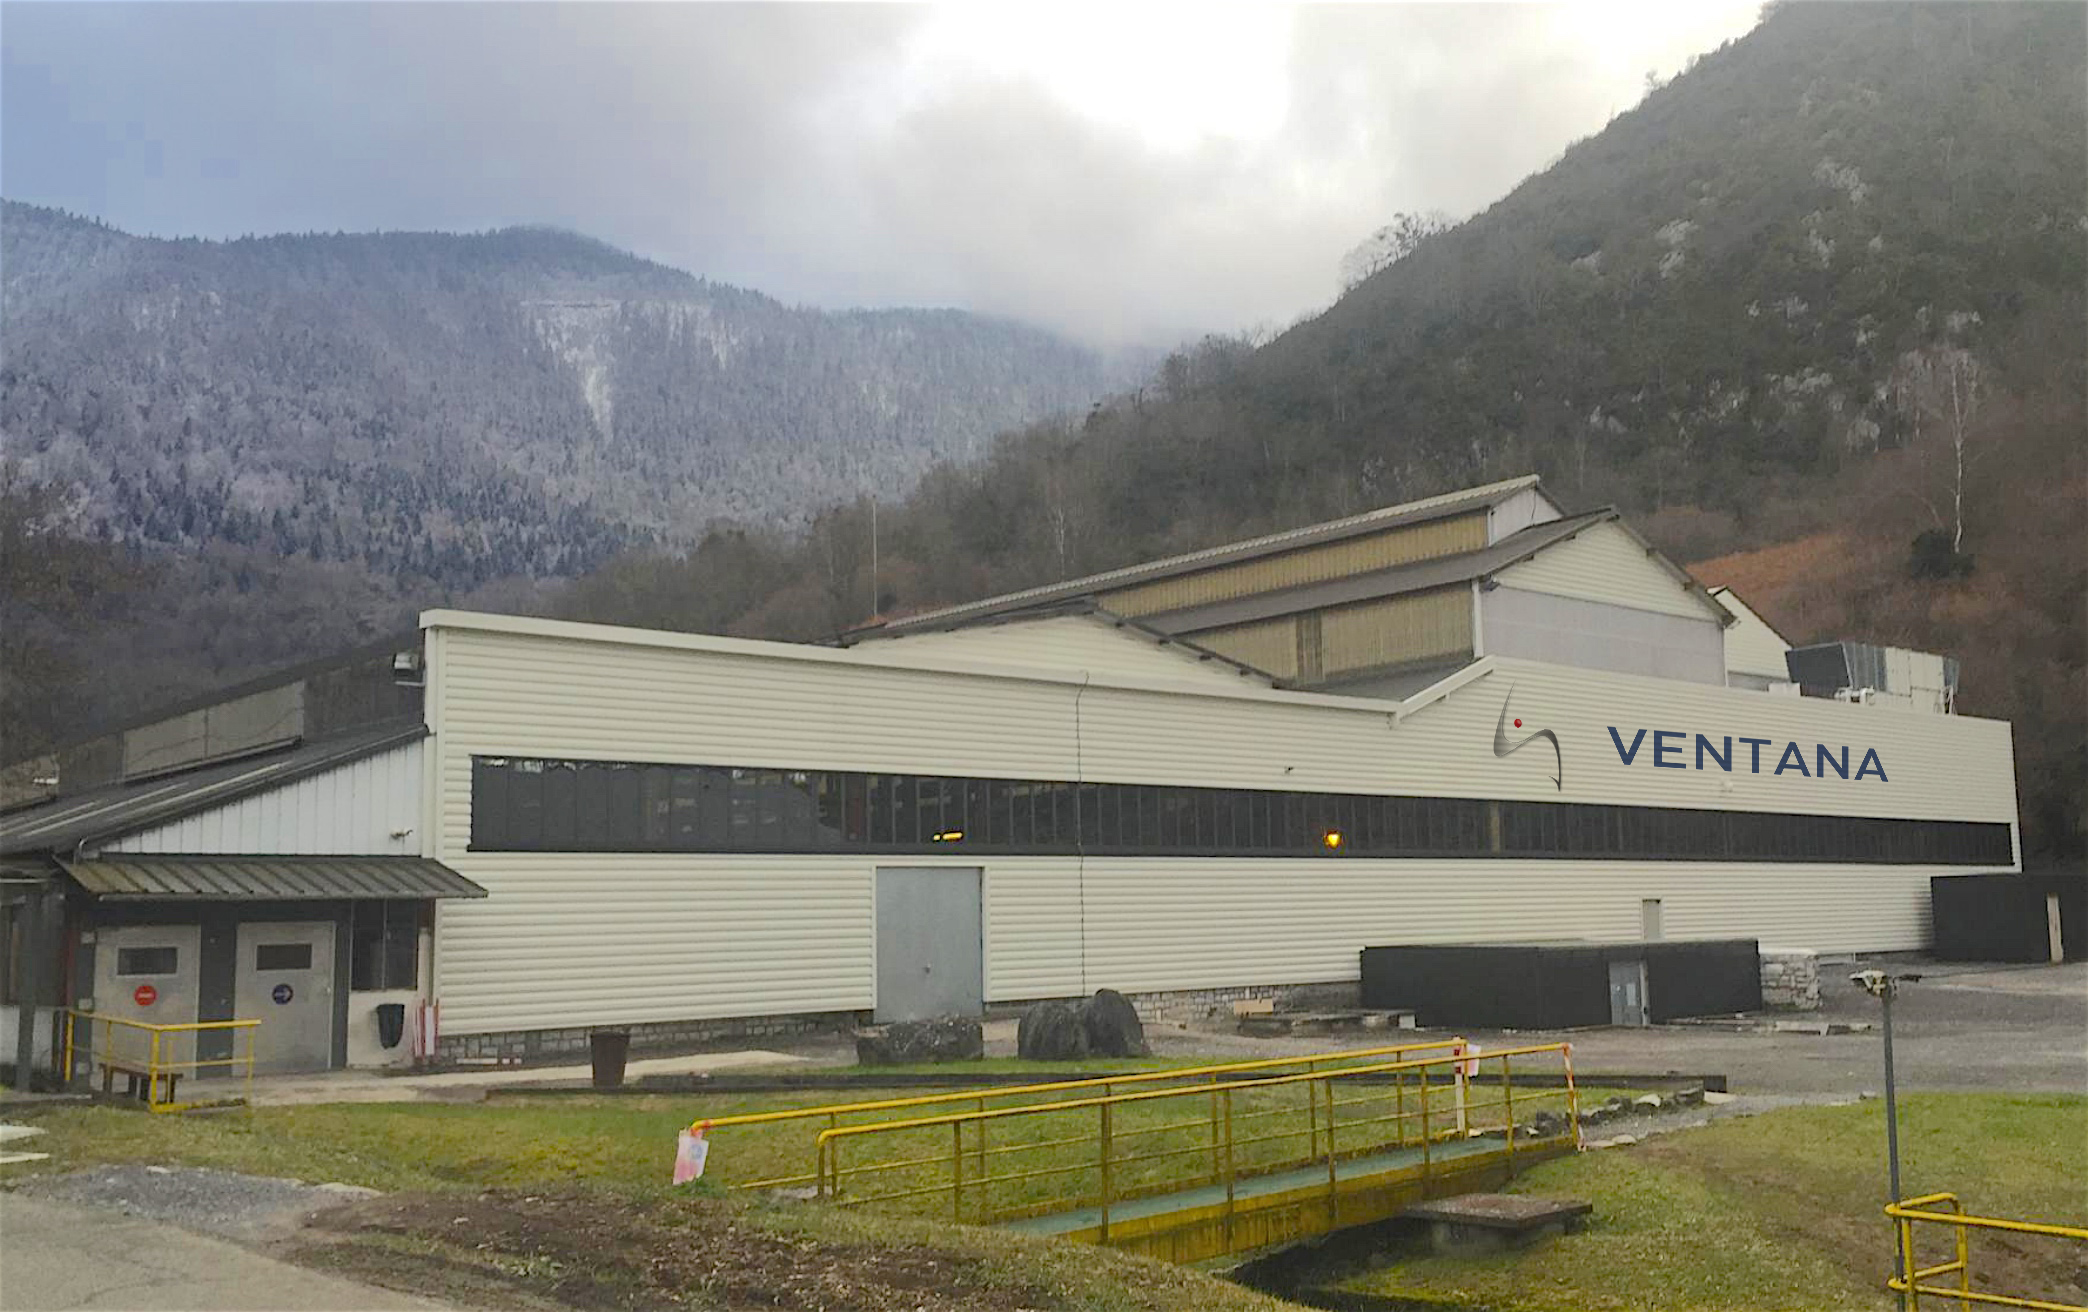 Ventana Foundry Arudy is the first company in the Pyrénées Atlantiques to benefit from state funds for aeronautical and automotive modernization